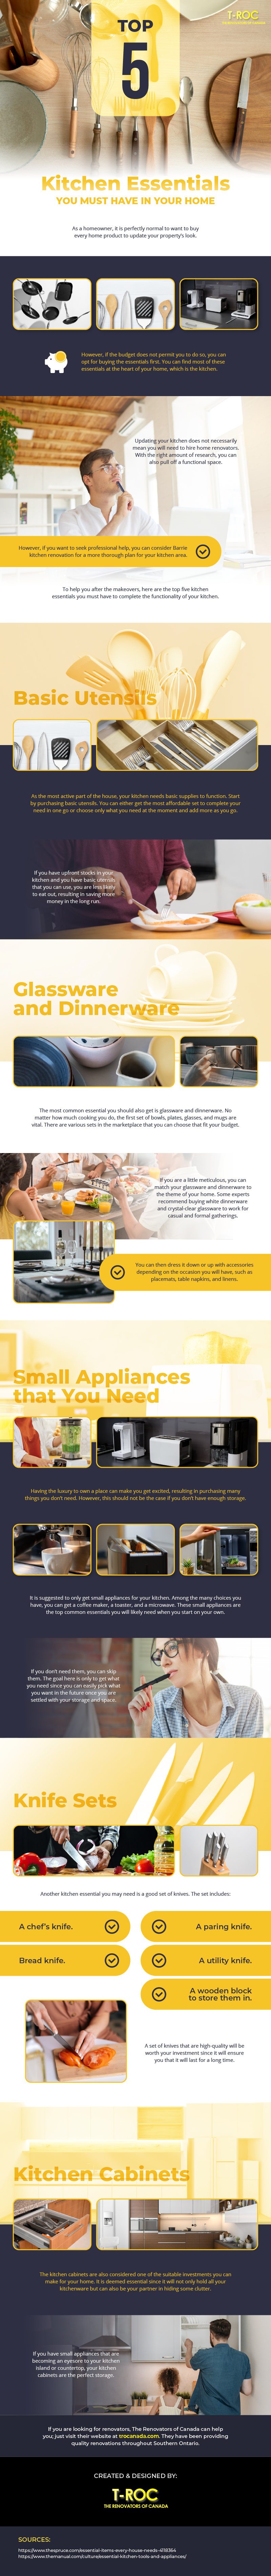 Top 5 Kitchen Essentials You Must Have in Your Home(infographic)